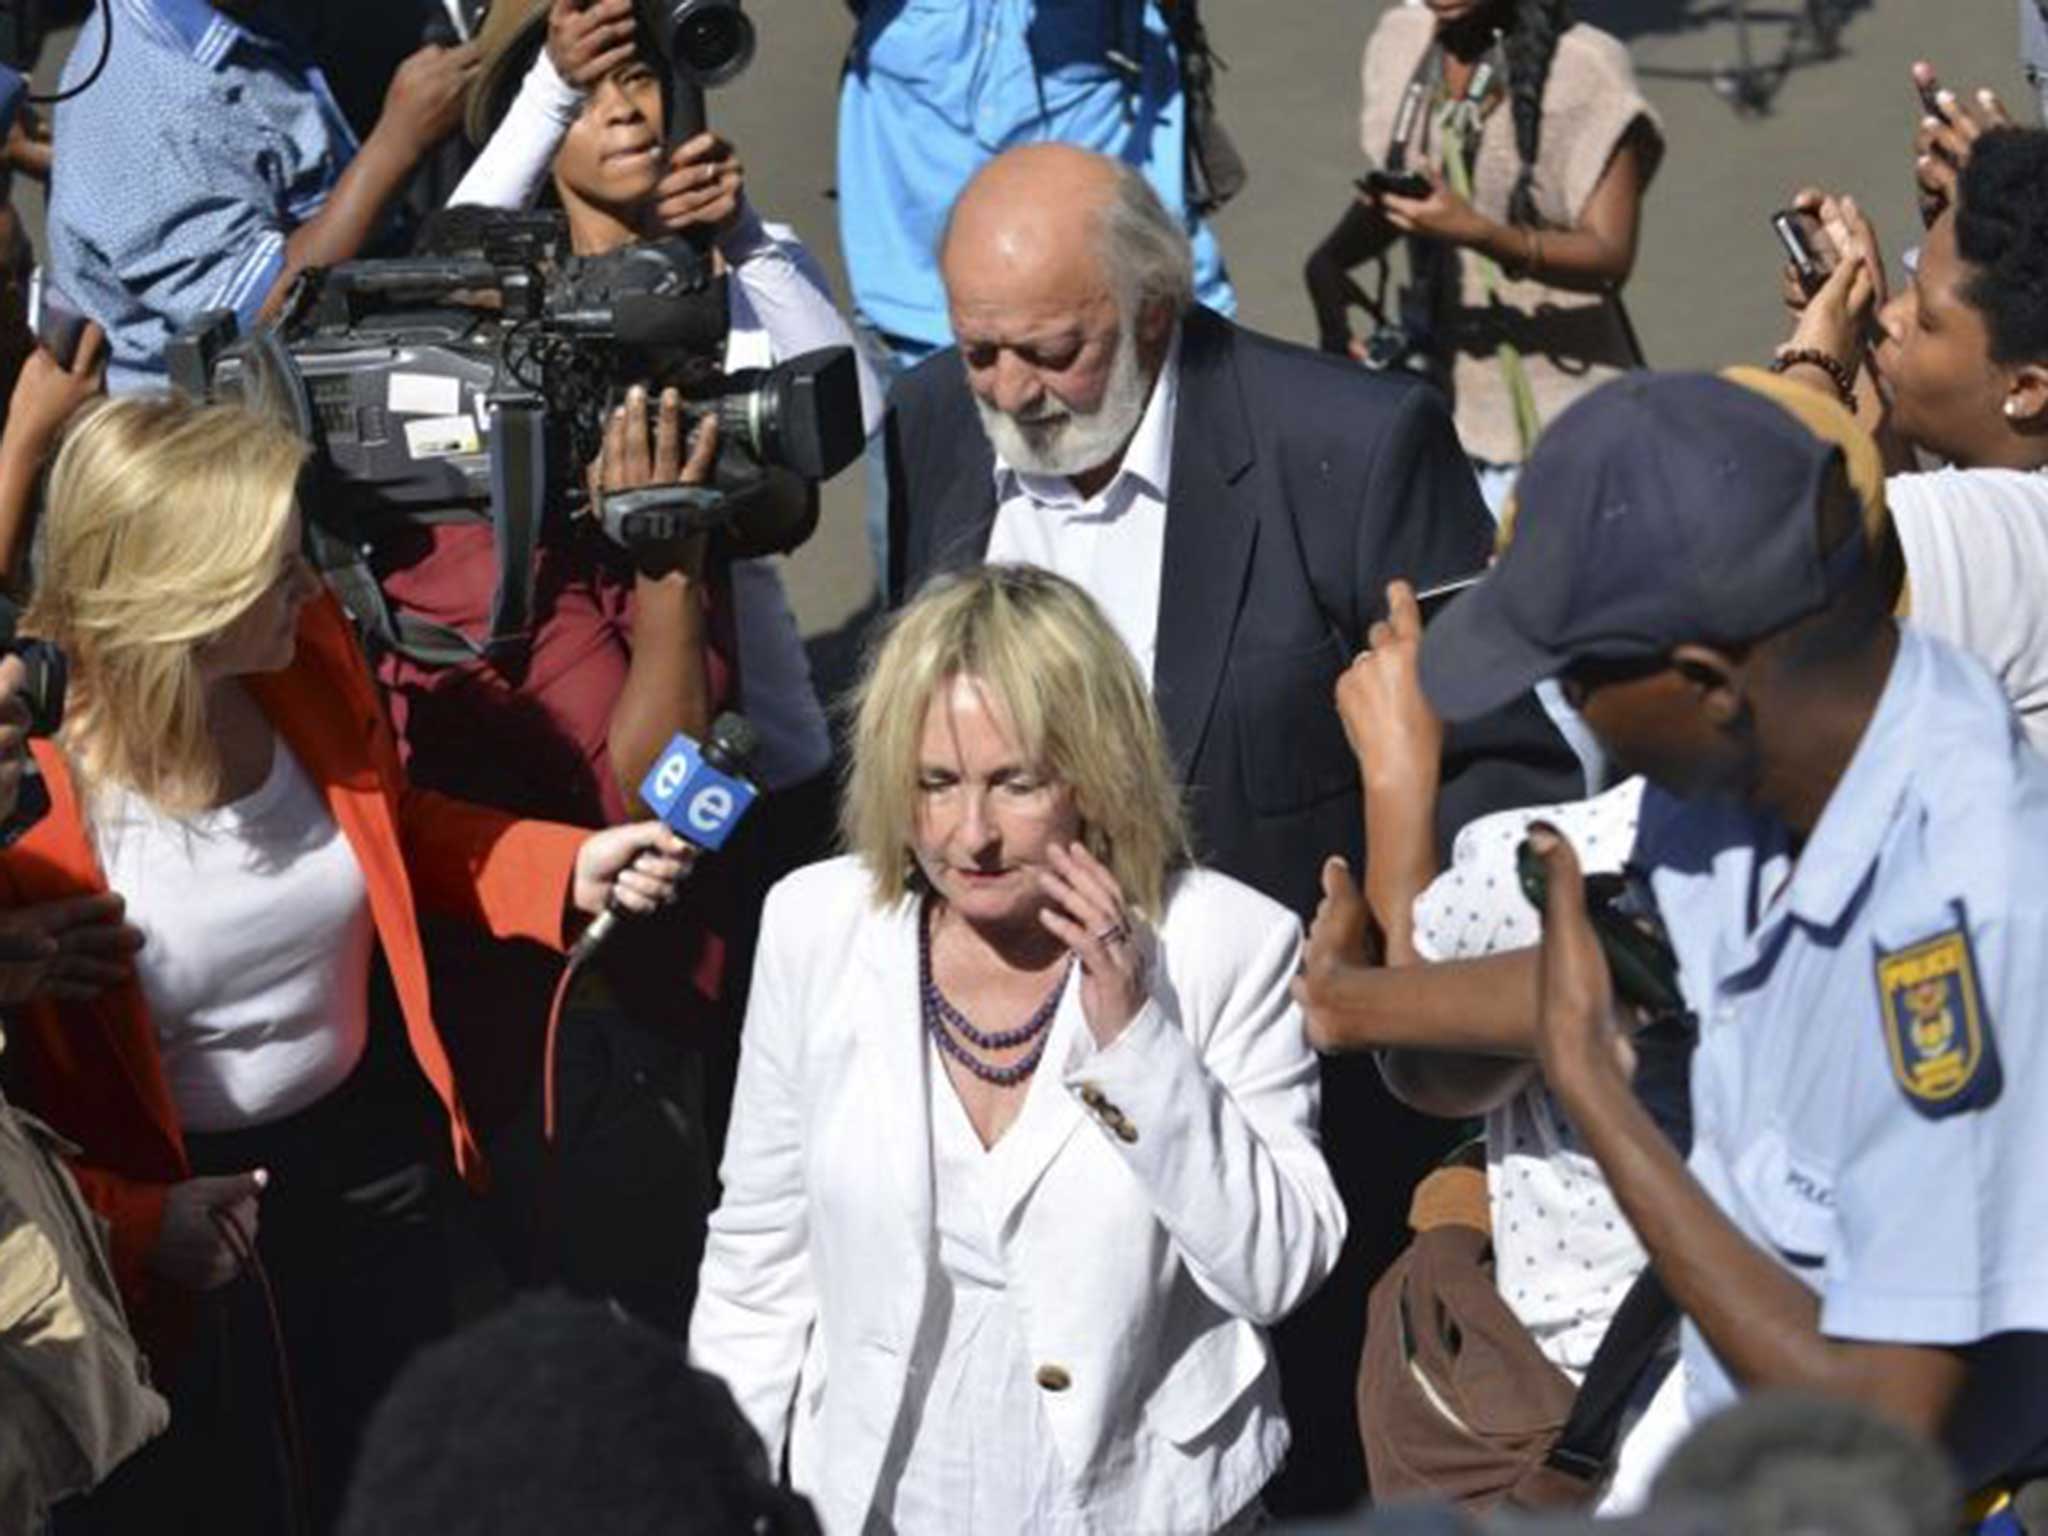 June Steenkamp arrives in court on the day of sentencing